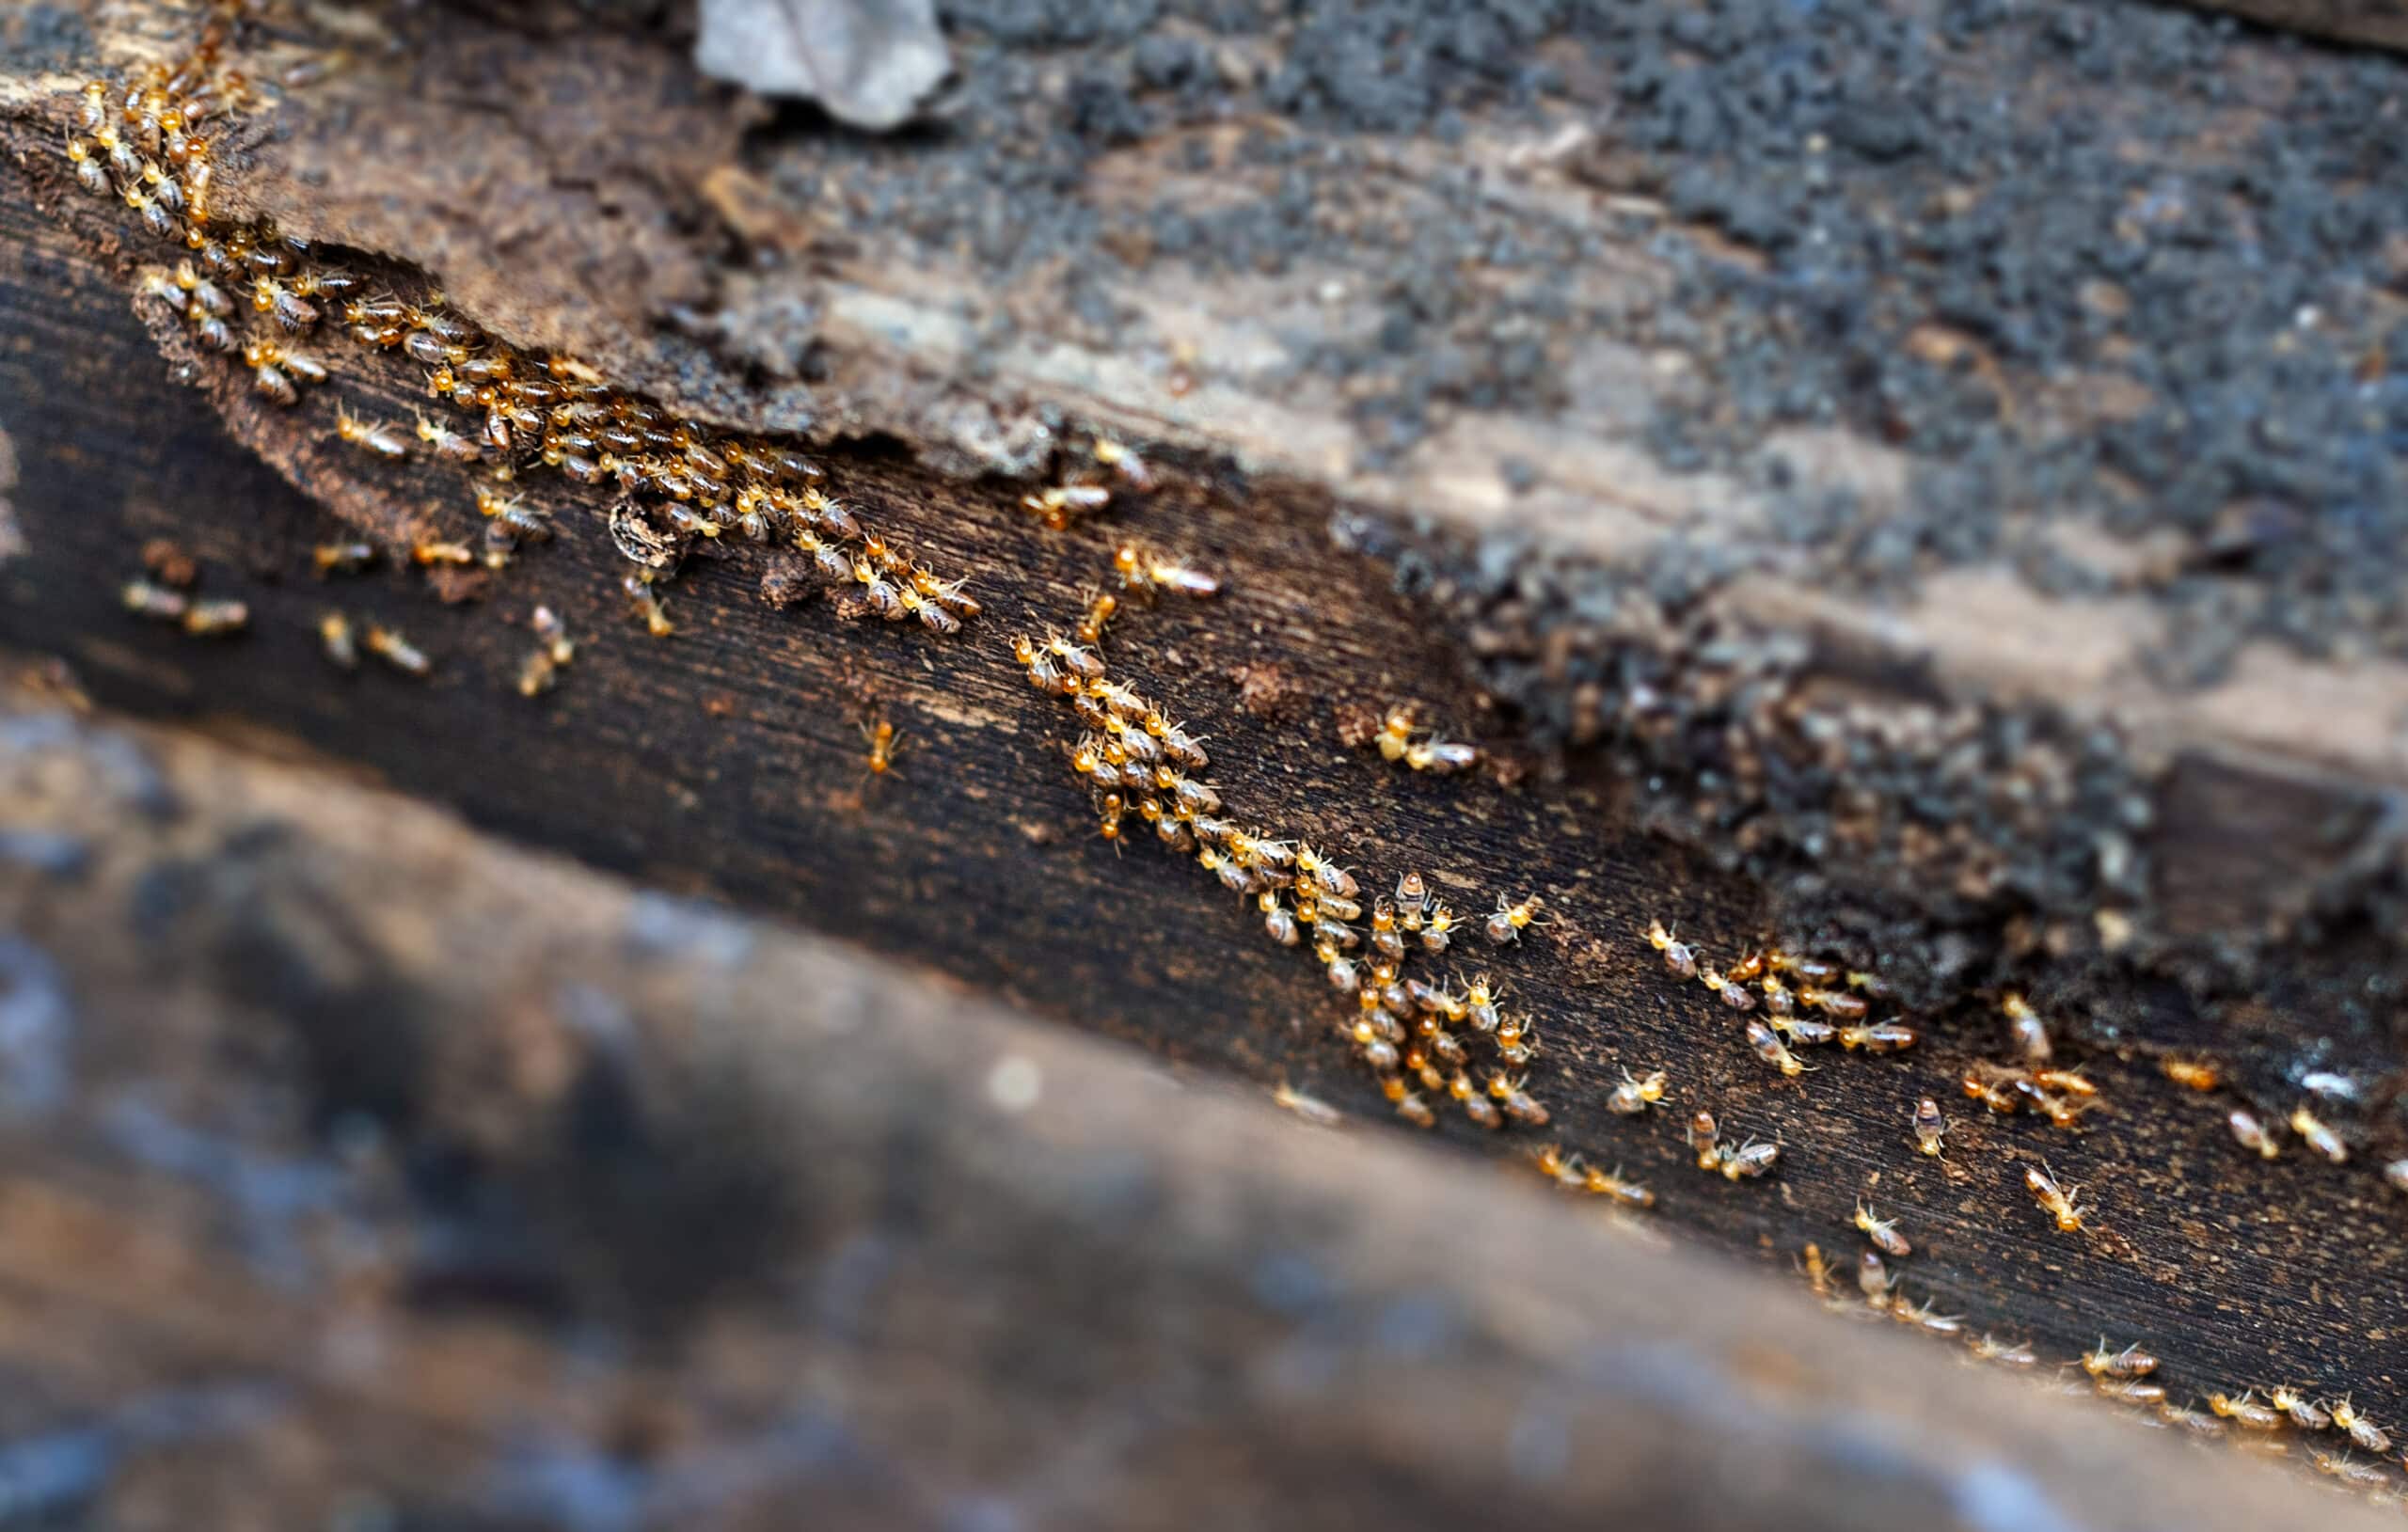 Termites marching on old wood.